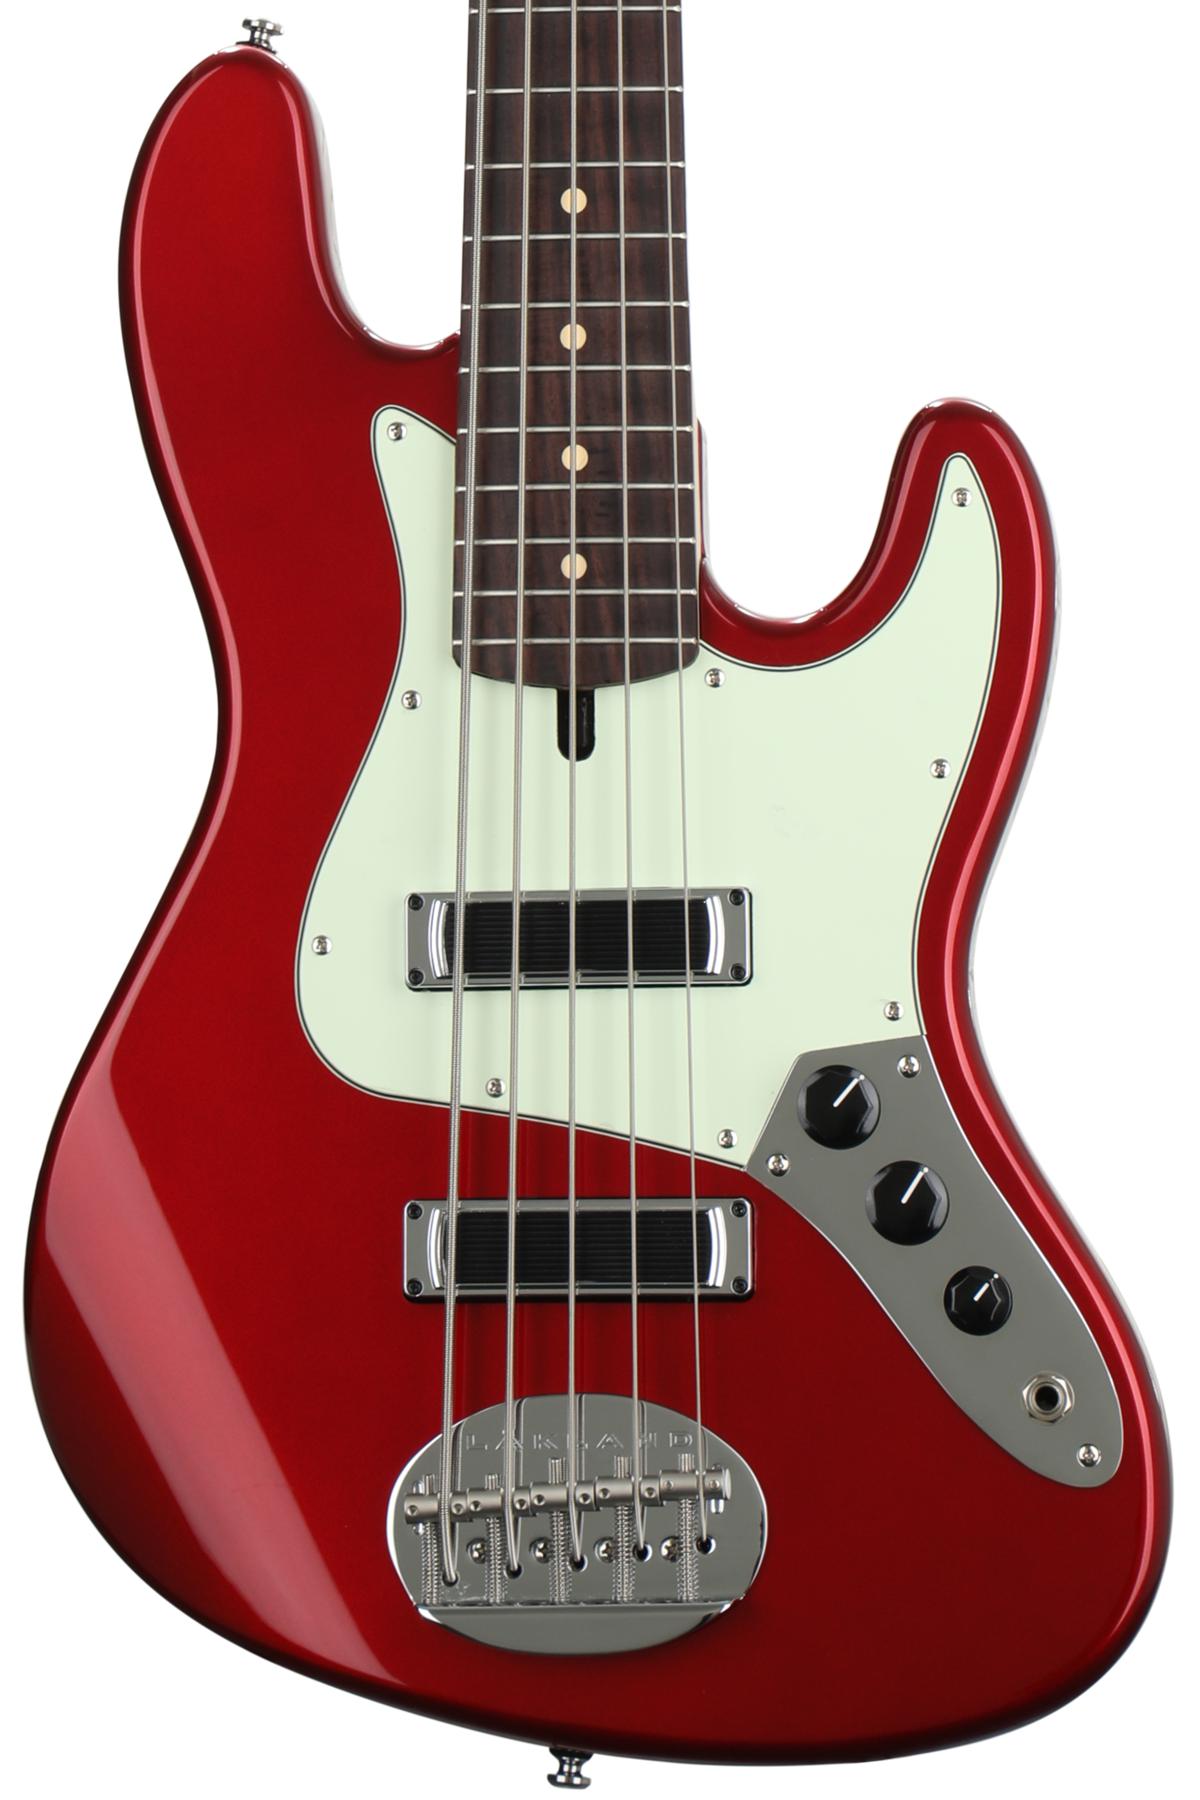 Lakland Skyline J Sonic 5 Bass Guitar - Candy Apple Red with Rosewood